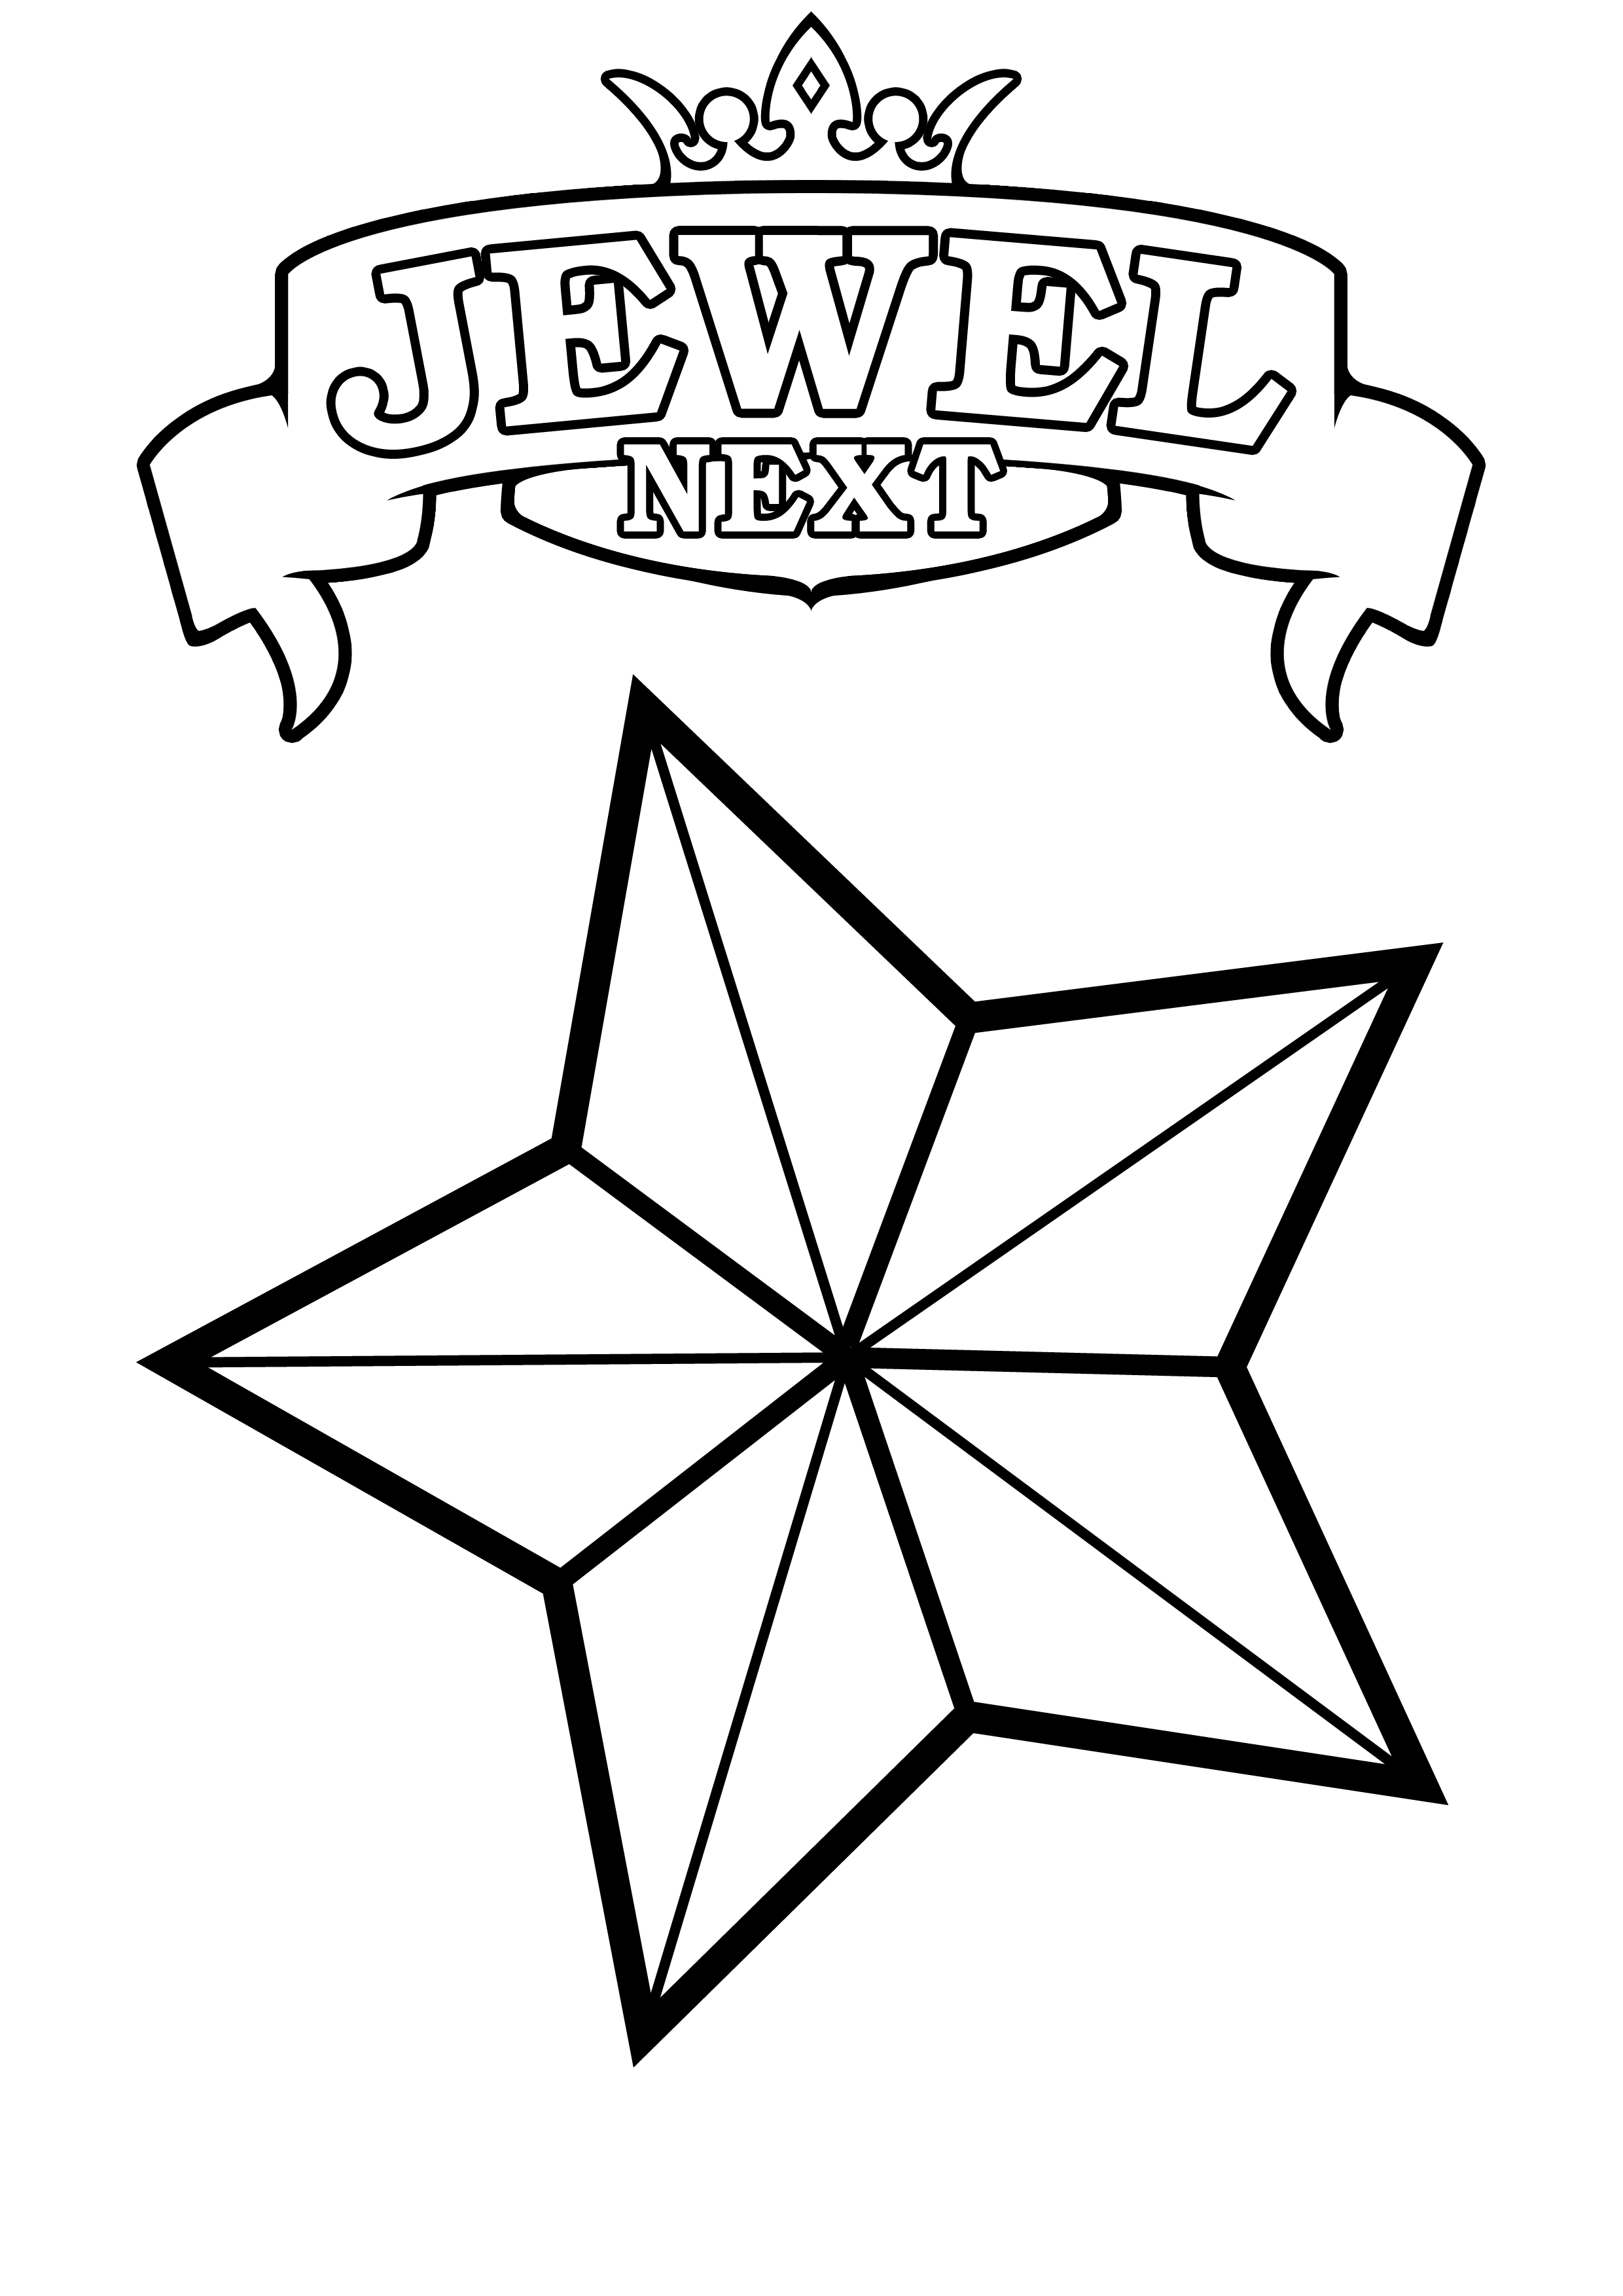 Stars Coloring Pages Jewel Next | Print Coloring Pages (1 Pictures ...